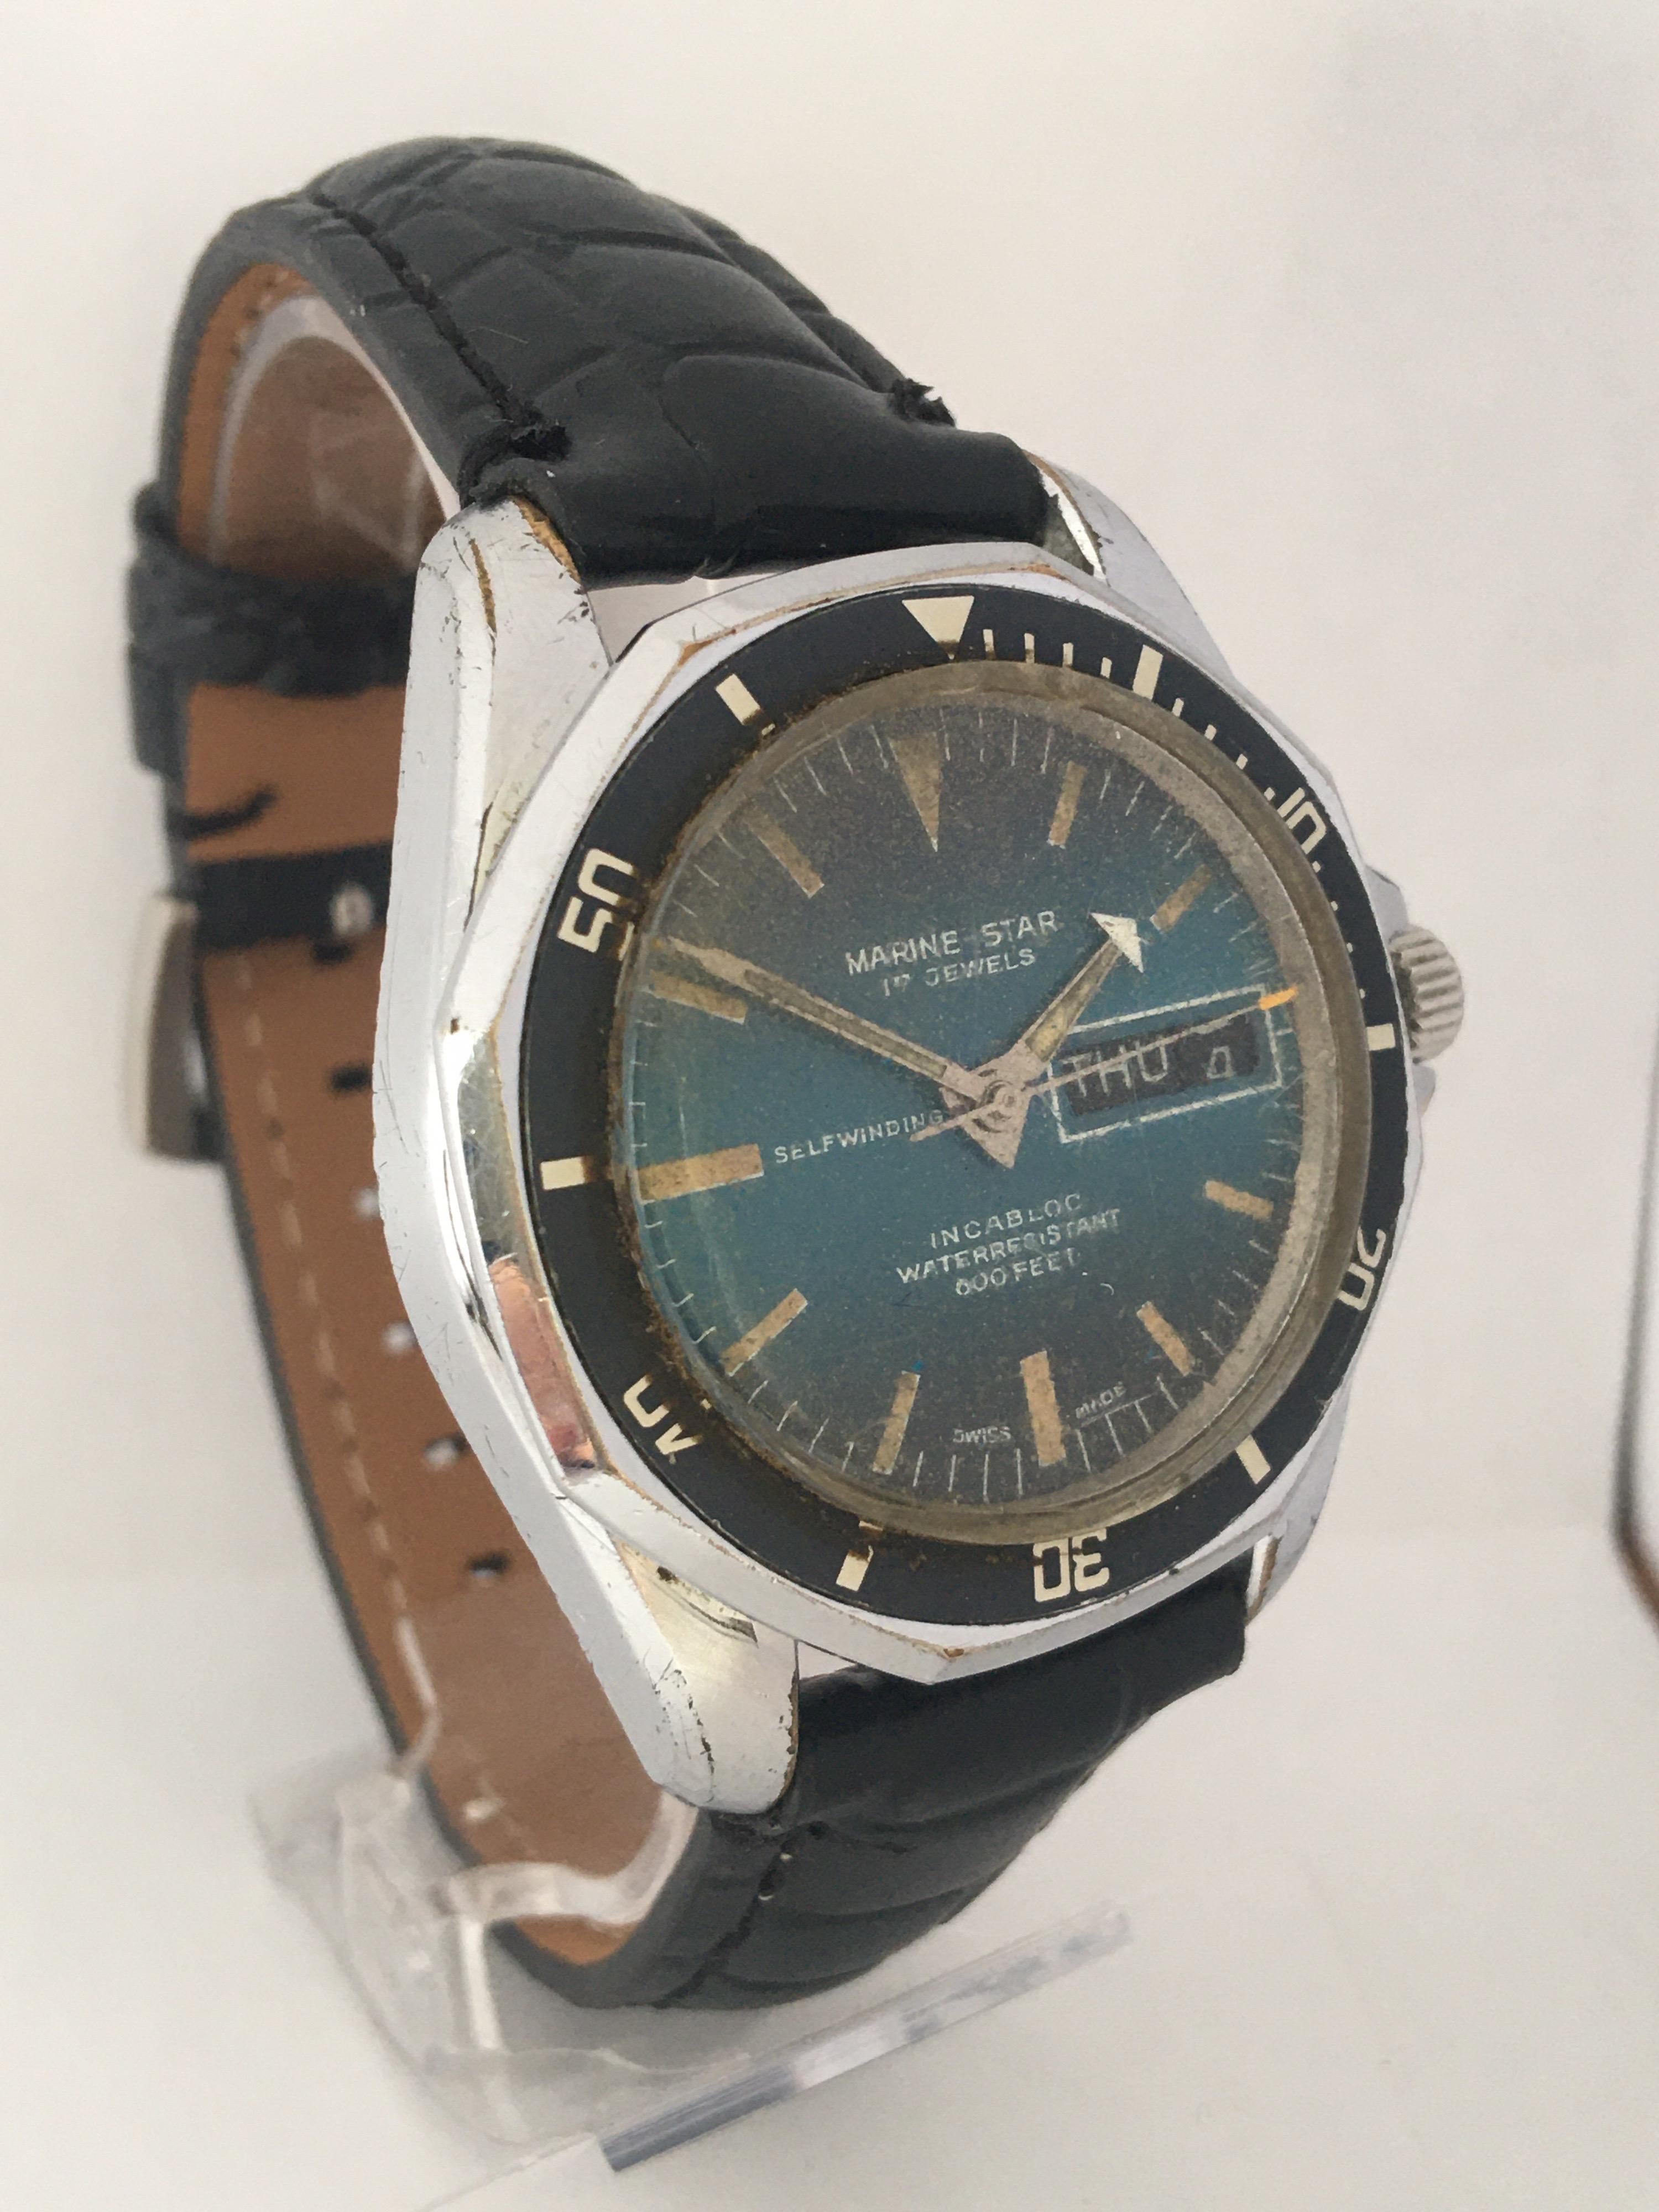 This beautiful vintage self winding (automatic) watch is in good working condition and it is running well (keeps a good time) . Visible signs of ageing and wear with some scratches on the glass and on the watch case as shown. The glass is a bit